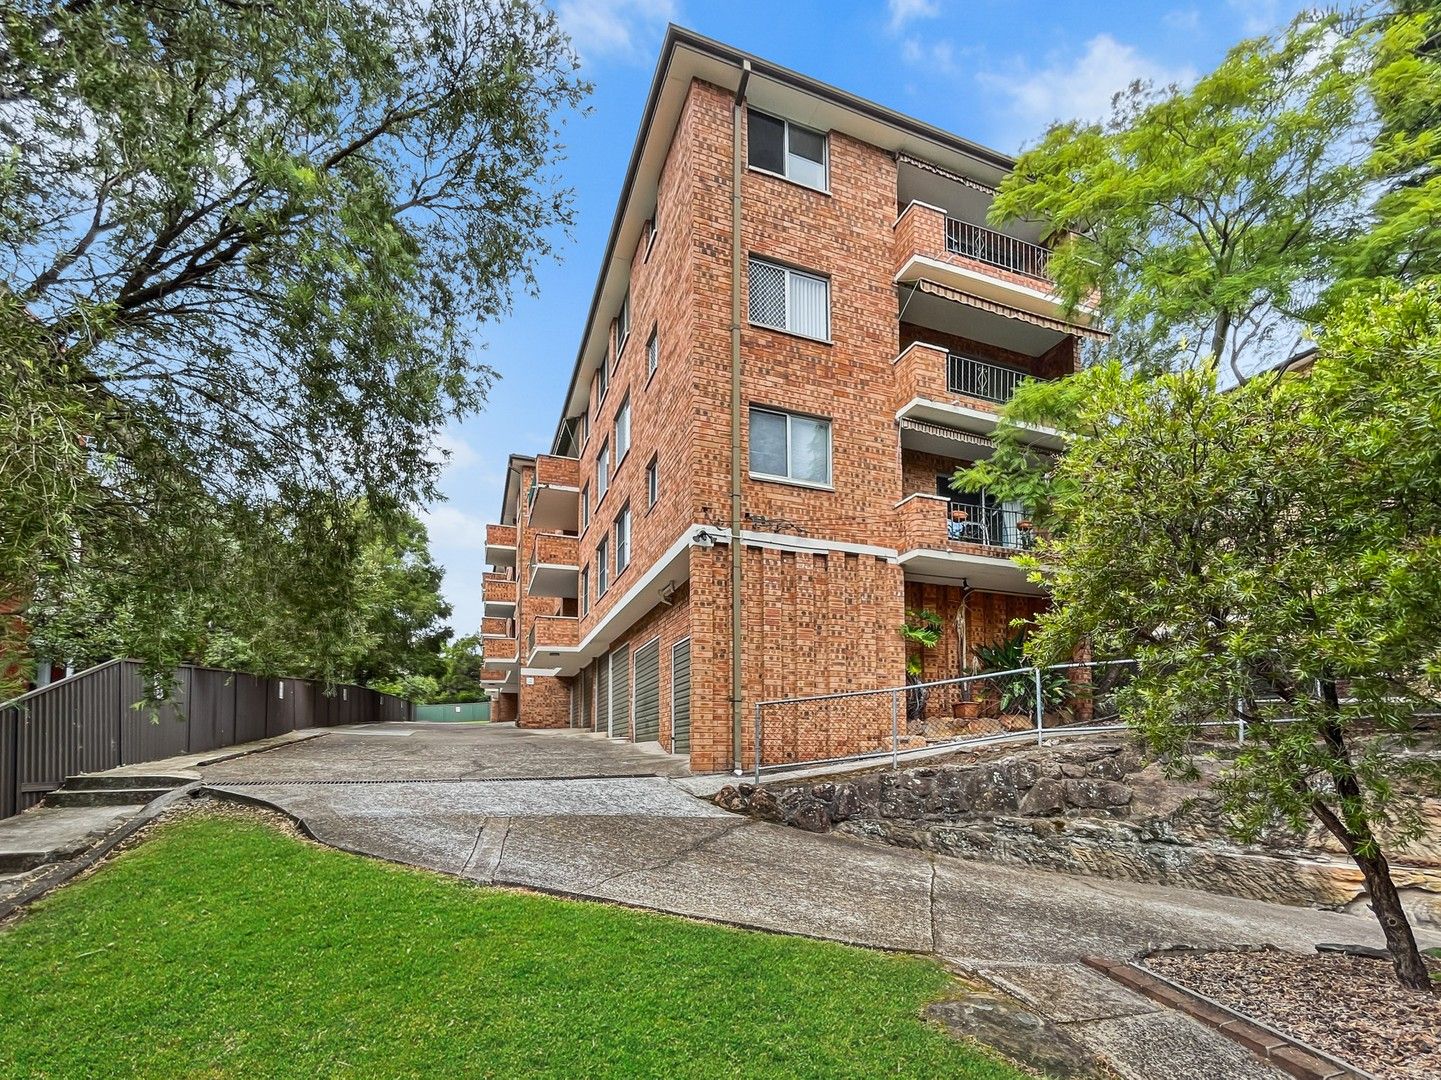 17/33 Meadow Crescent, Meadowbank NSW 2114, Image 0